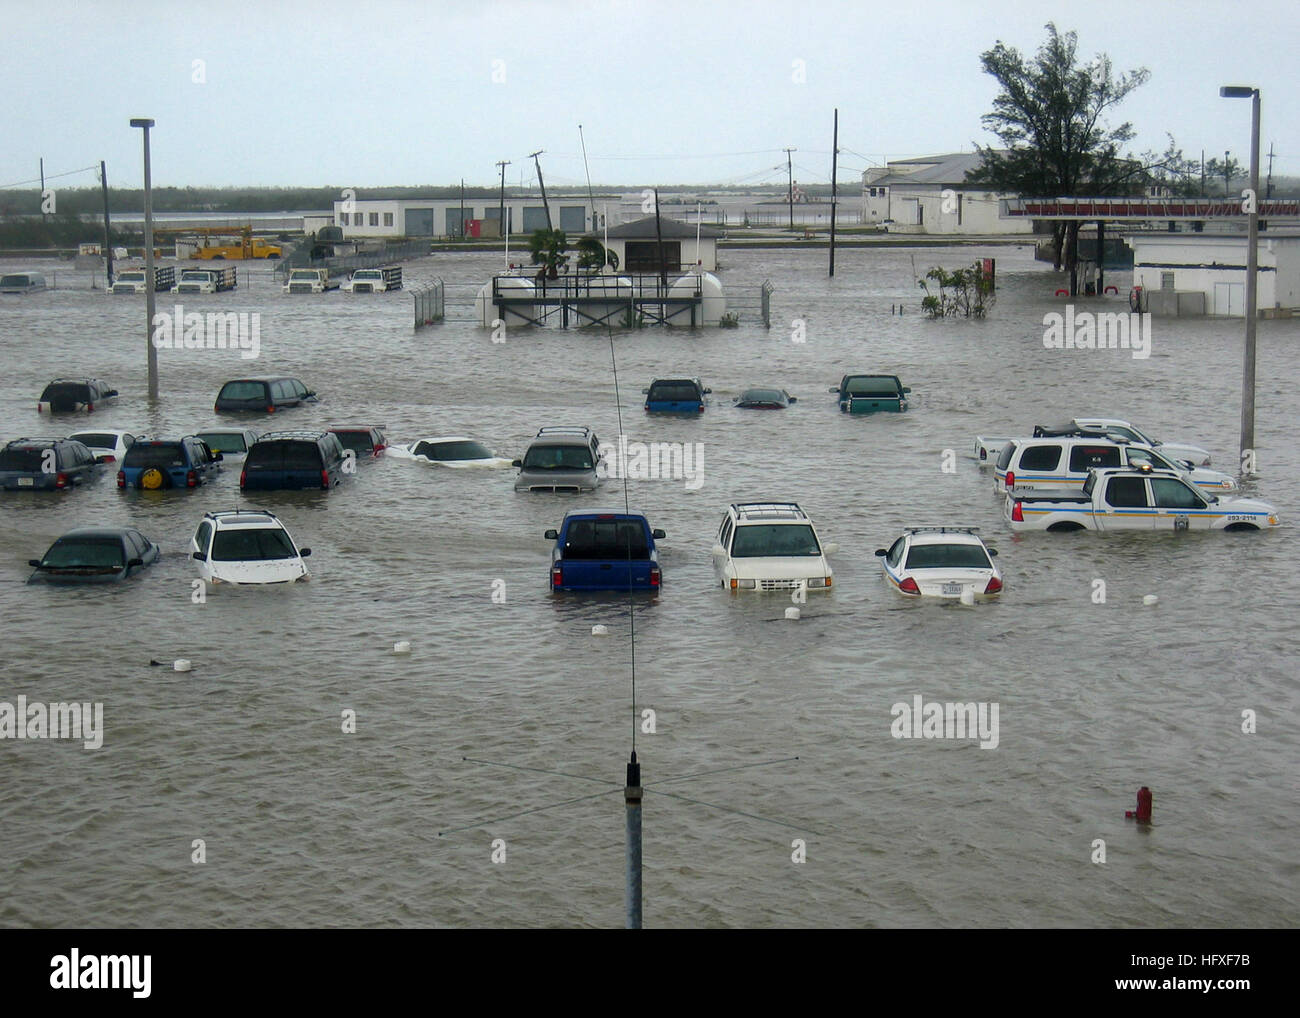 051024-N-7664R-001 Key West, Fla. (Oct. 24, 2005) – A parking lot on board Naval Air Station Key West, Fla., is flooded after being hit by Hurricane Wilma. At 6:30 am EDT, Hurricane Wilma made landfall very near Cape Romano, Florida as a Category 3 hurricane. U.S. Navy photo by Lt. Cmdr. Brian Riley (RELEASED) US Navy 051024-N-7664R-001 A parking lot on board Naval Air Station Key West, Fla., is flooded after being hit by Hurricane Wilma Stock Photo